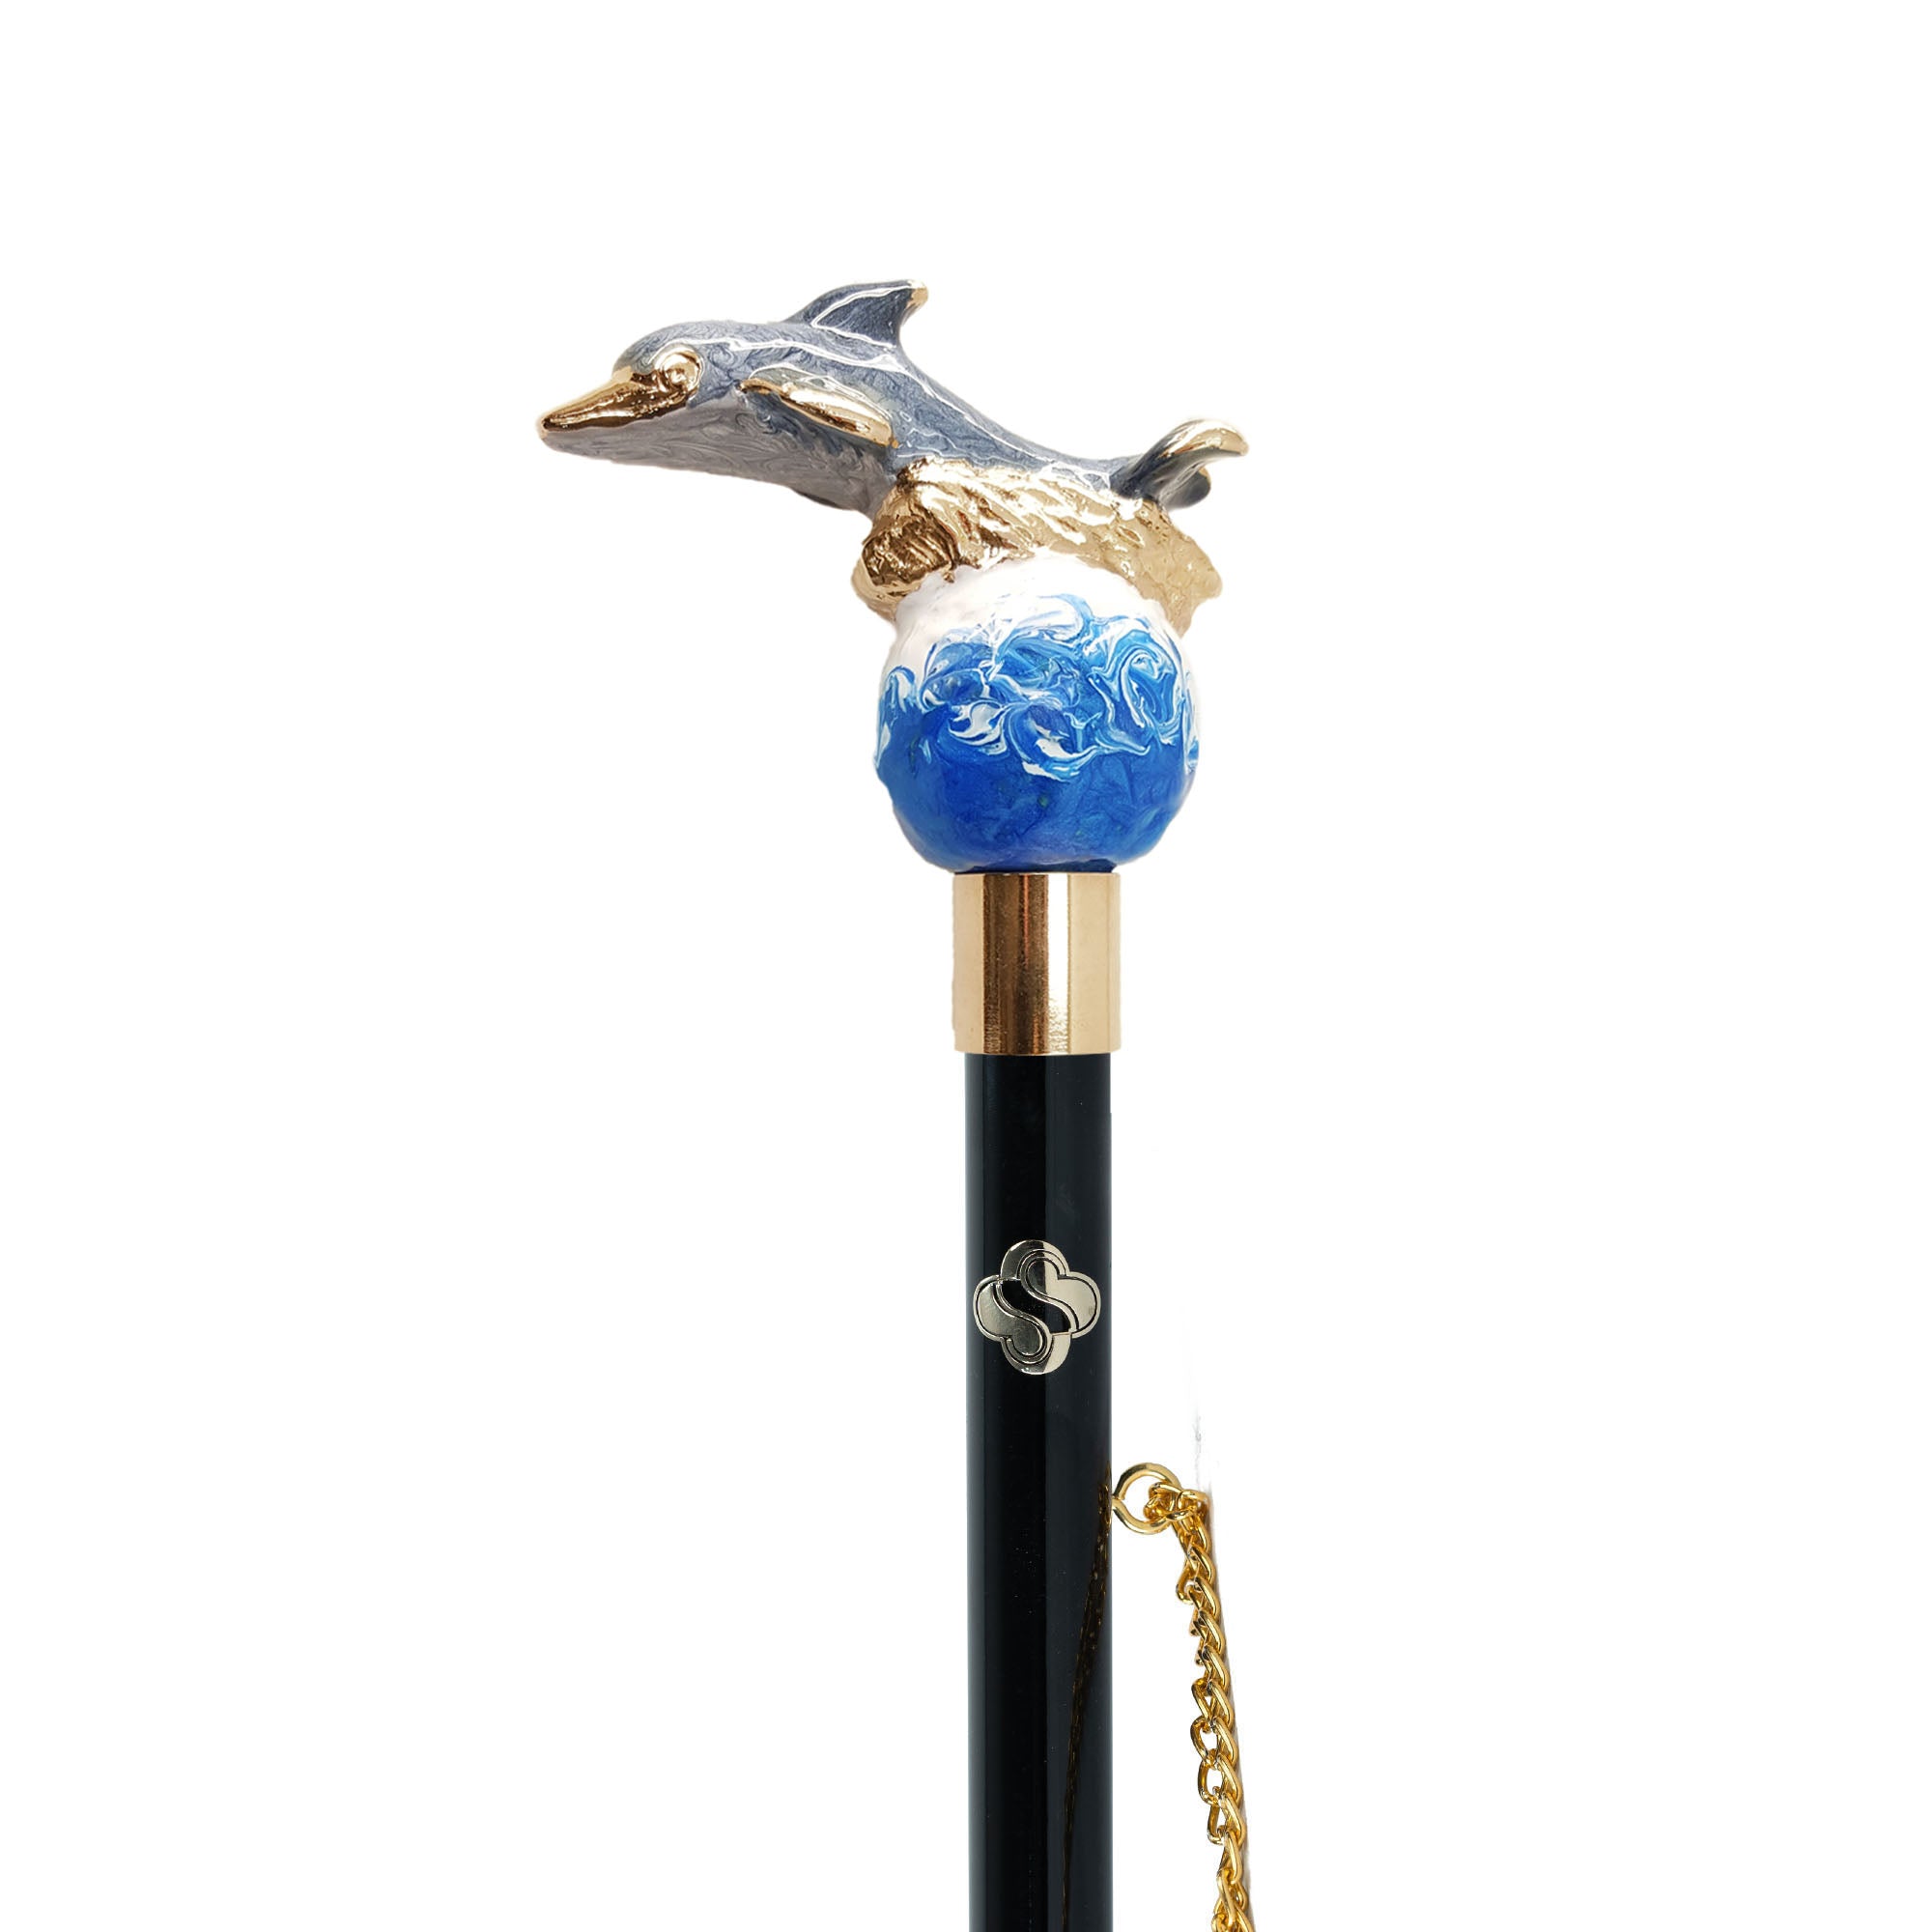 Dolphin Delight: Hand-Painted 24K Gold-Plated Dolphin Shoehorn